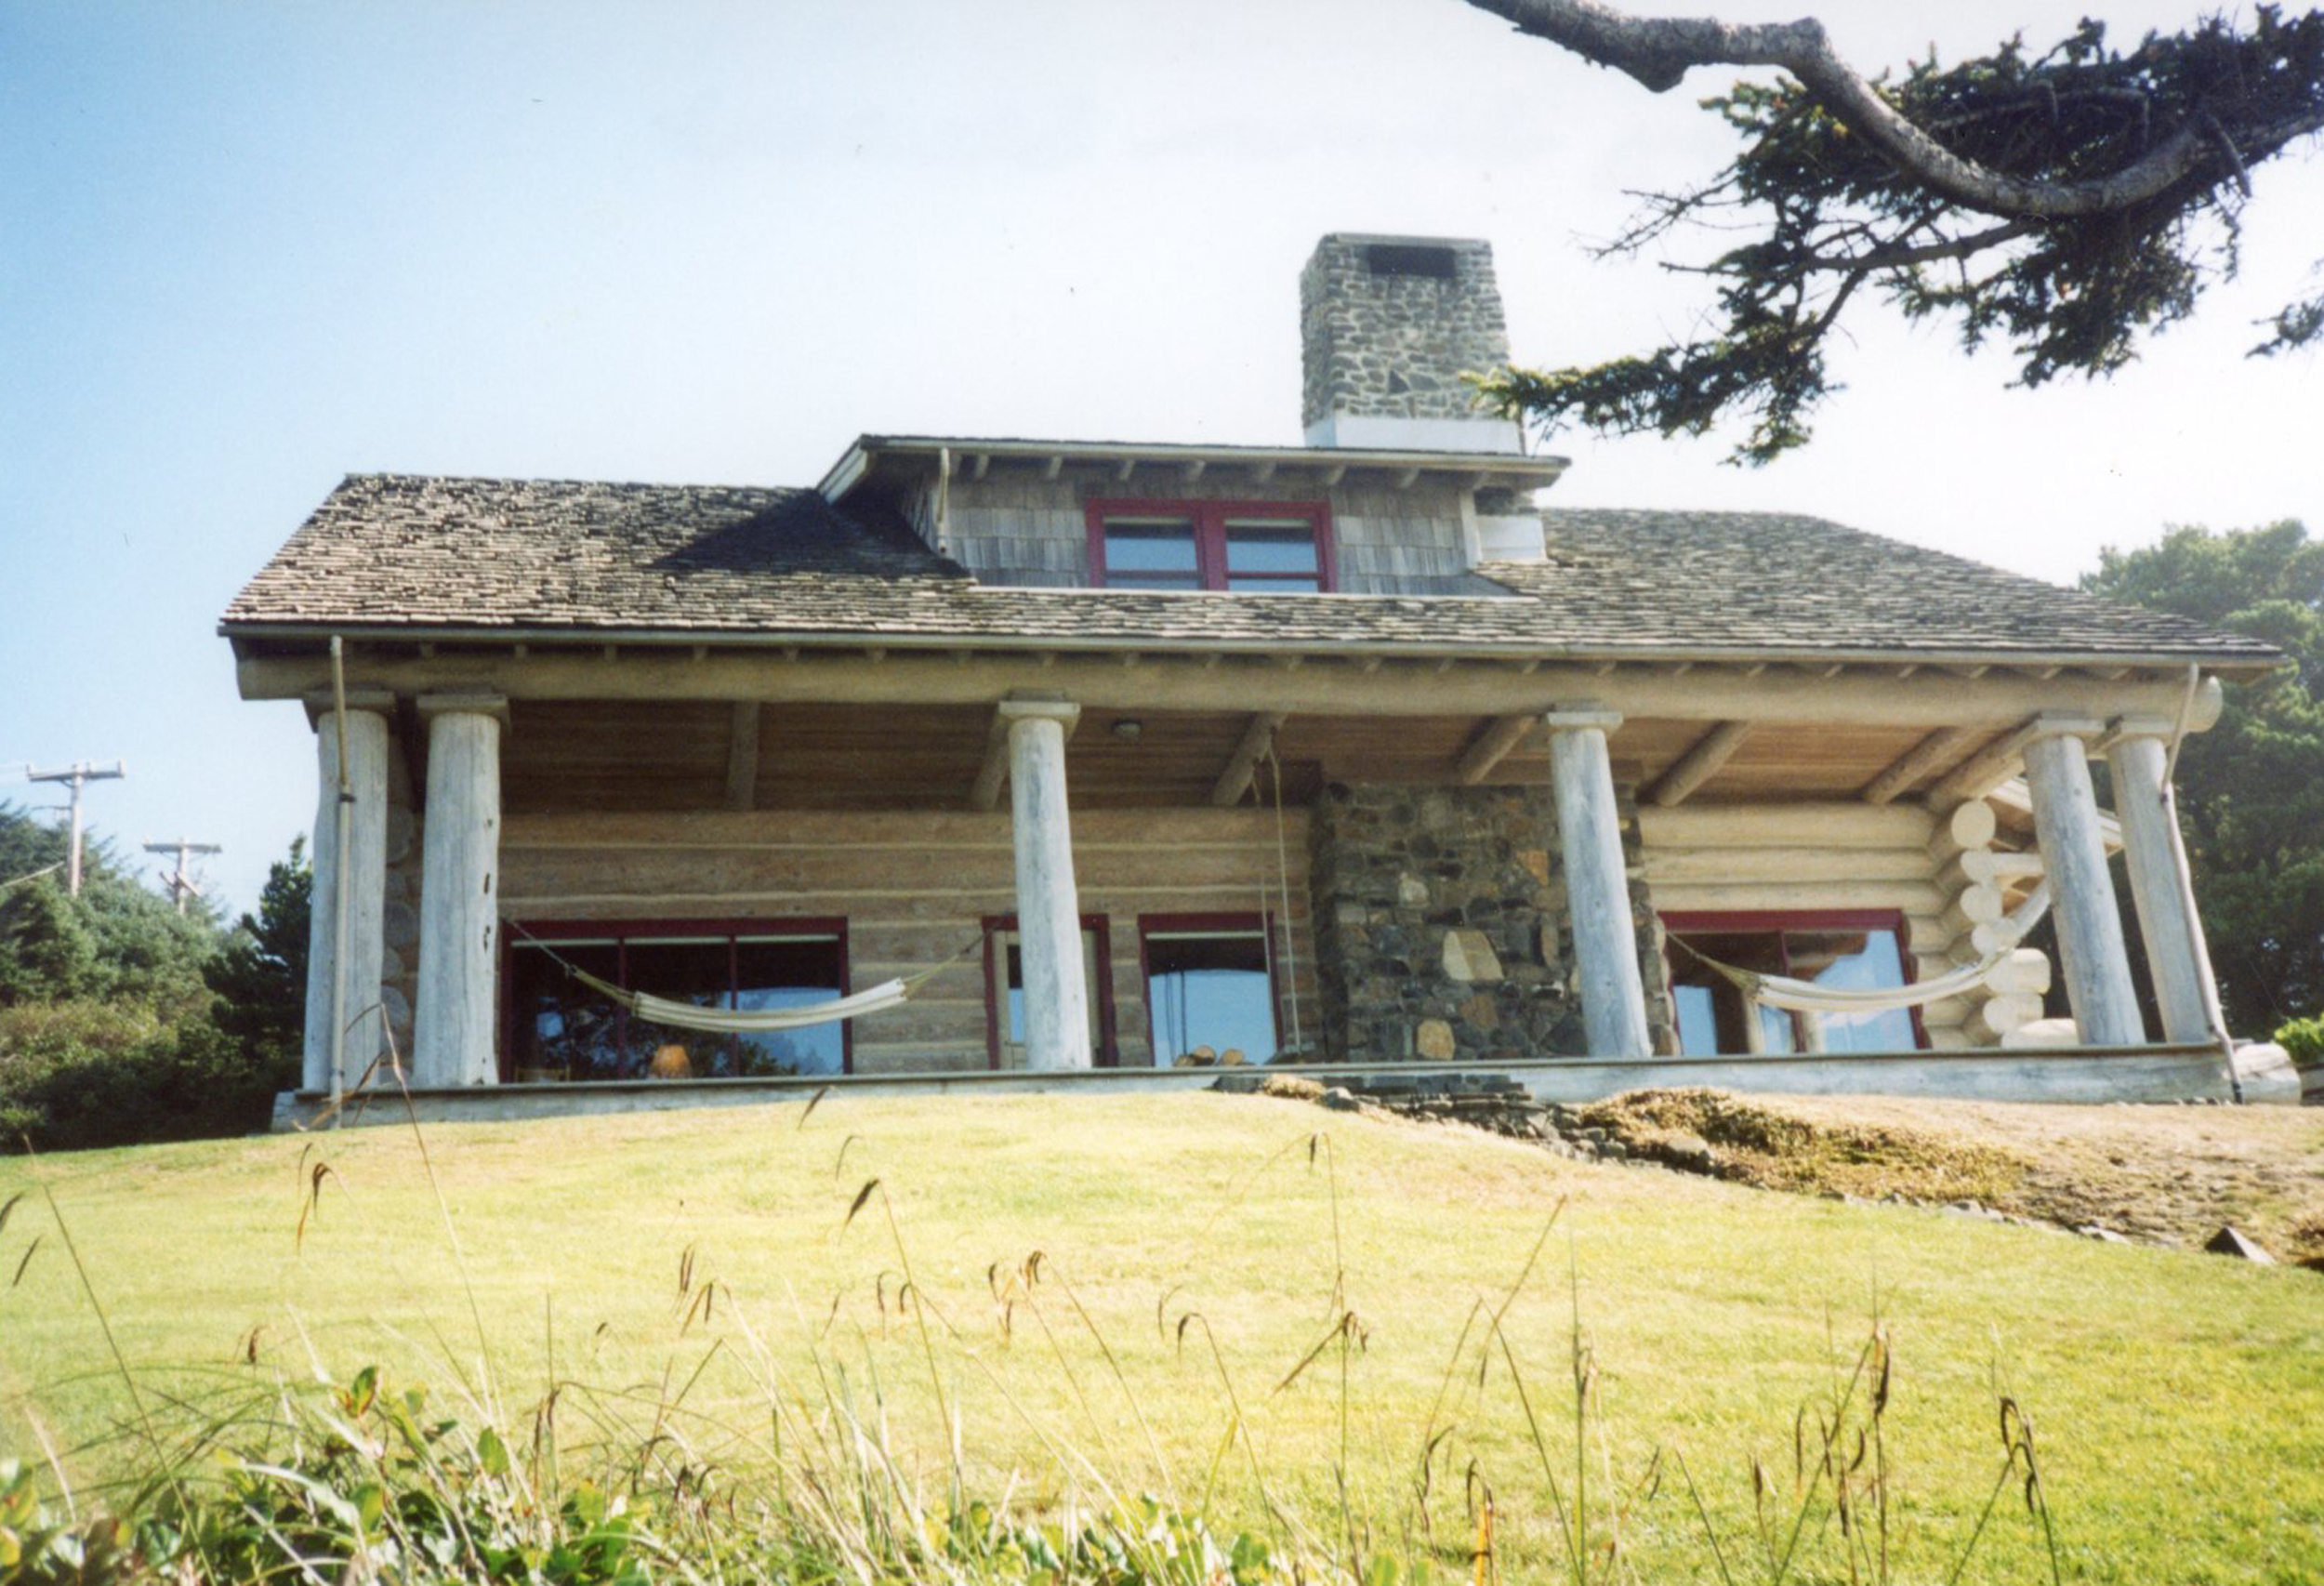 West-Bouvy home, image taken in August of 2014 for the Cannon Beach History Center & Museum's annual fundraiser the Cottage & Garden Tour. 